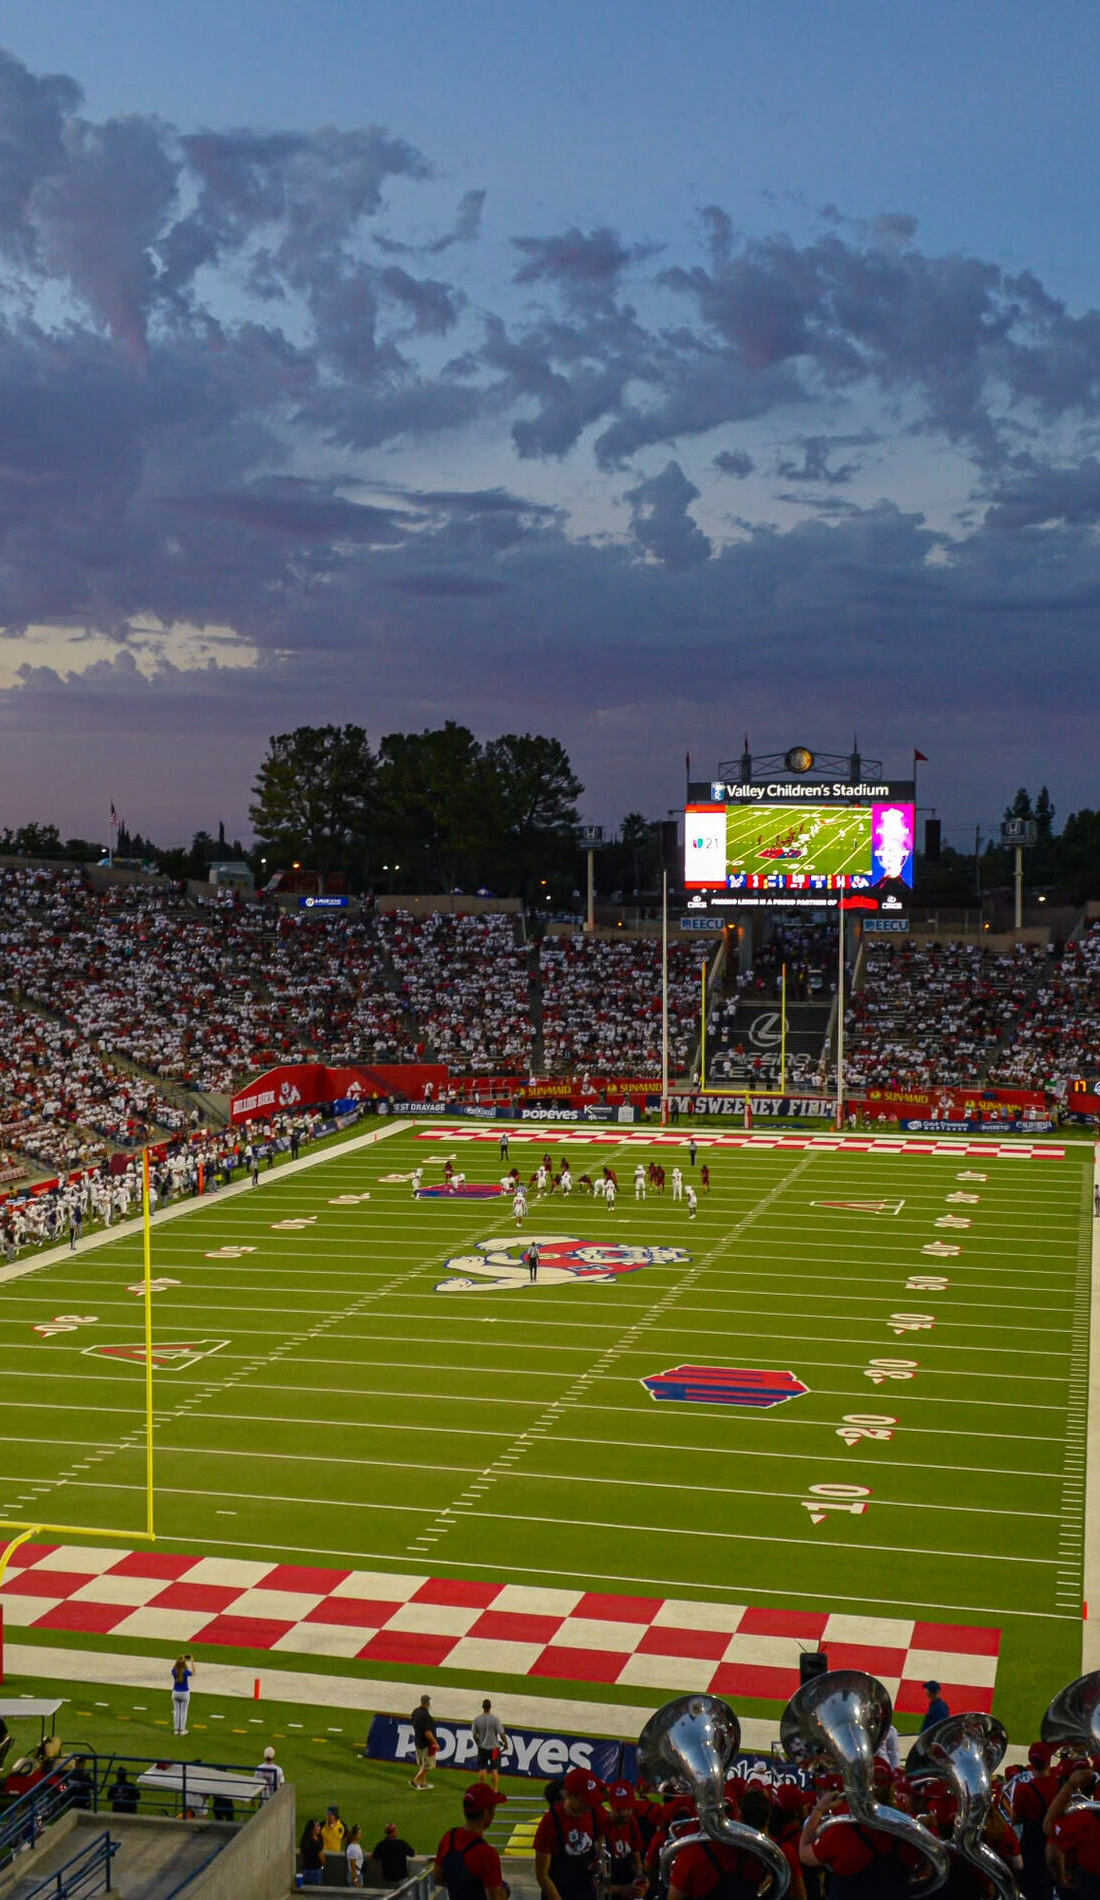 A Fresno State Bulldogs Football live event